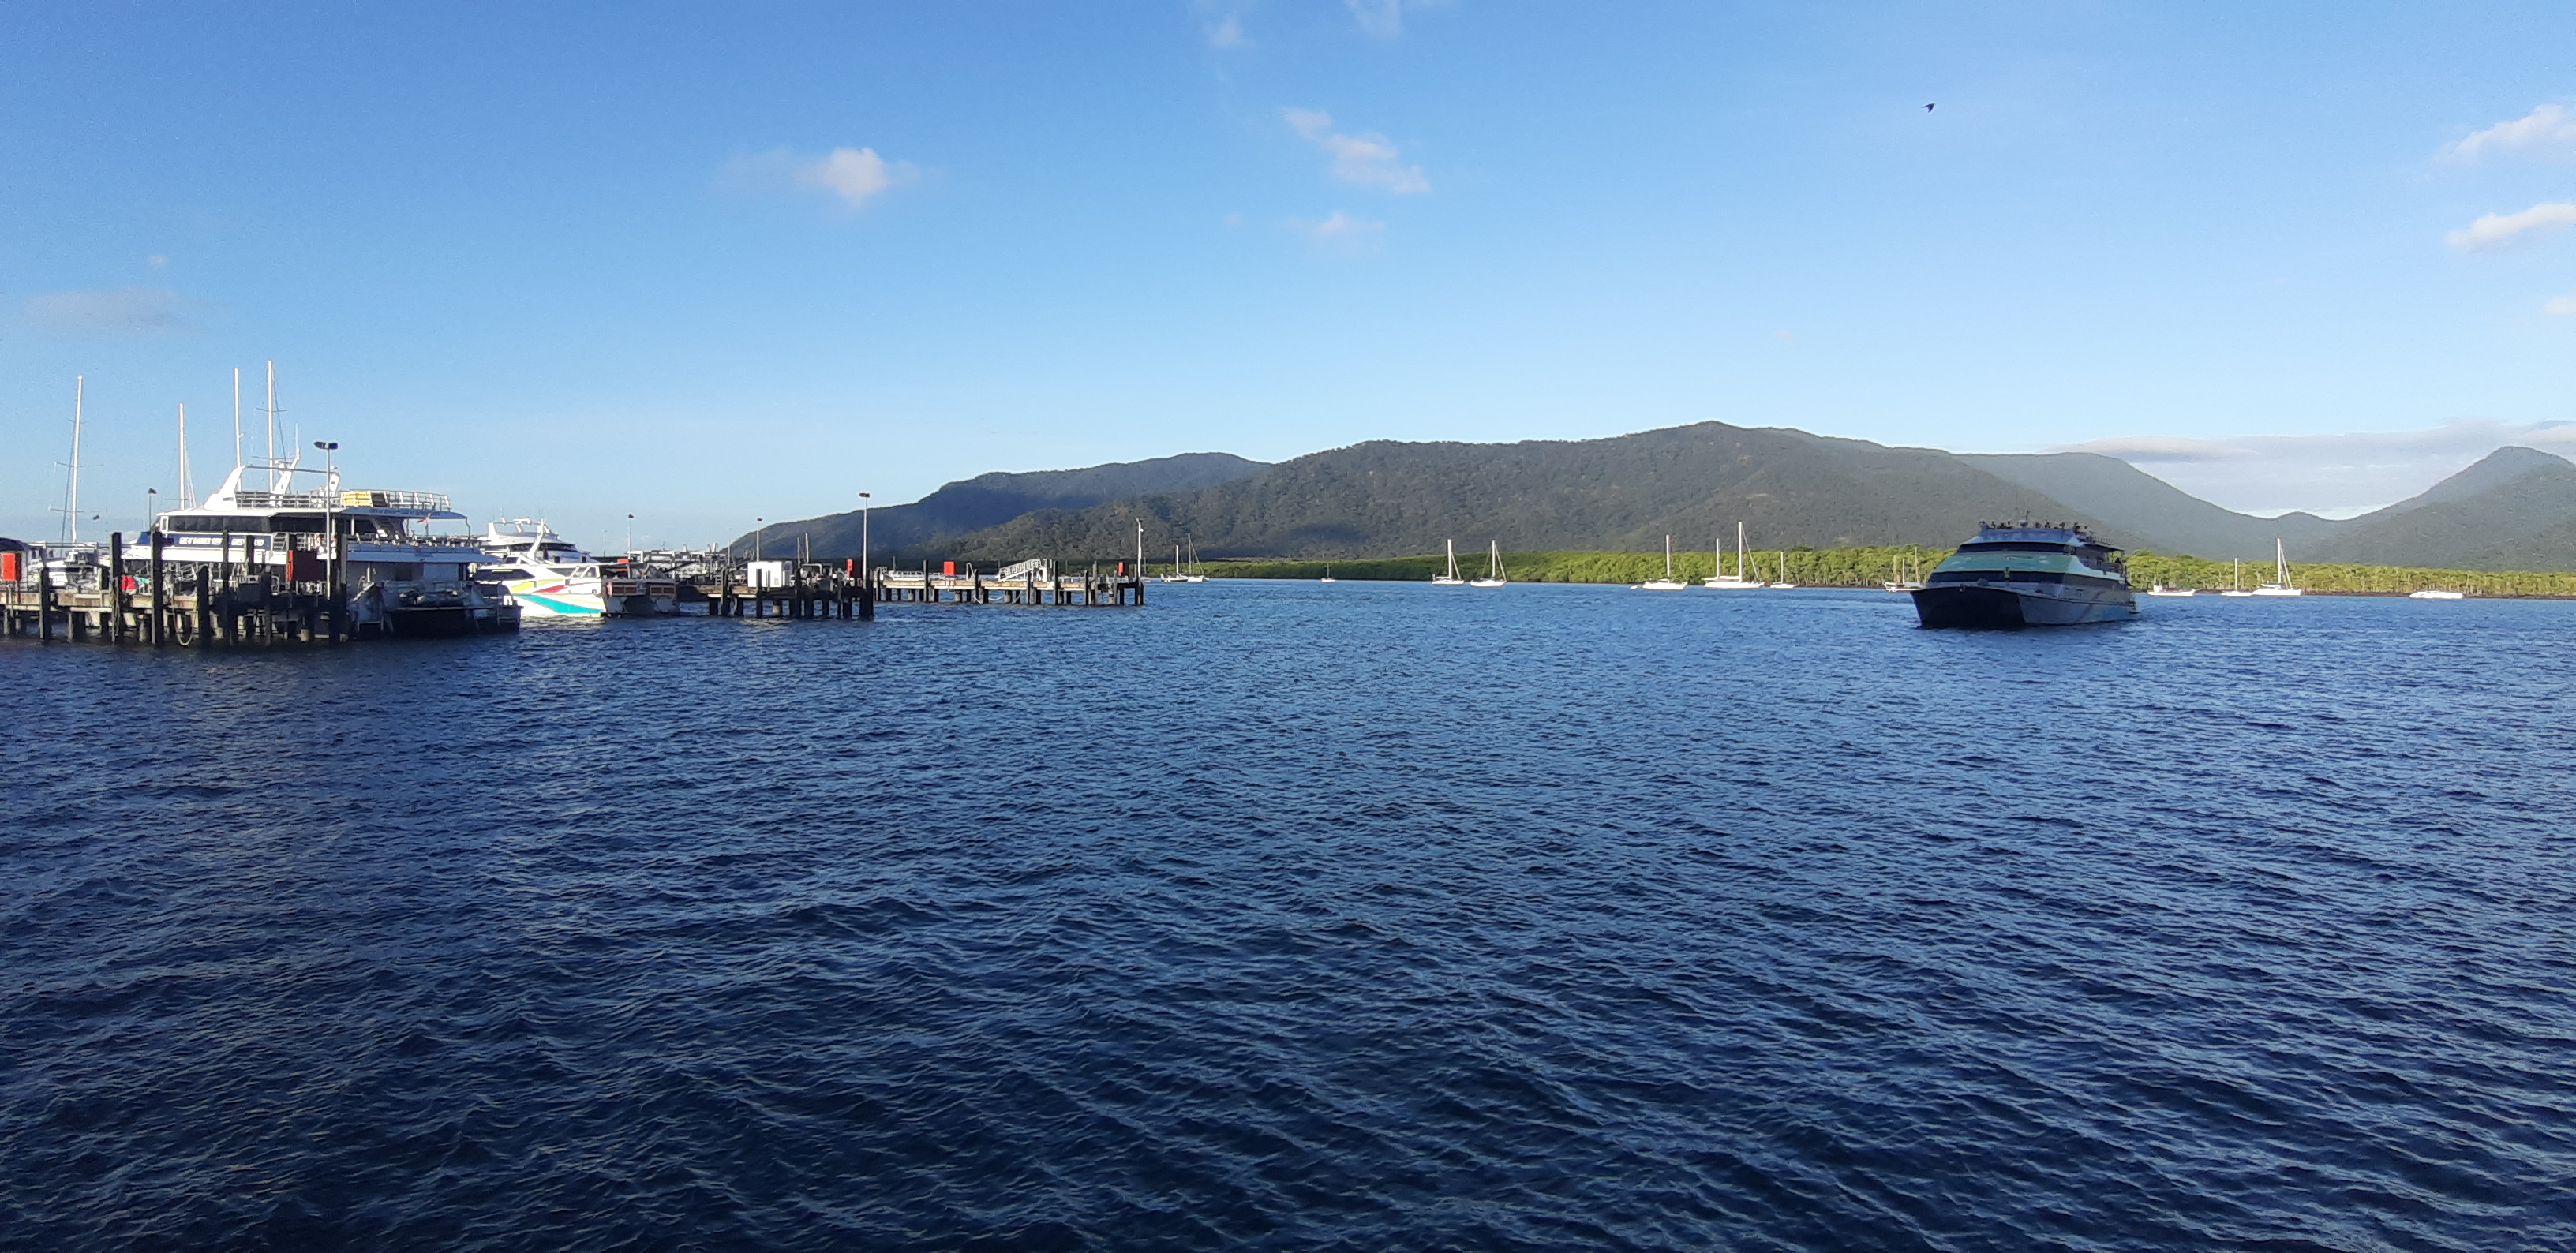 The view from Cairns harbour